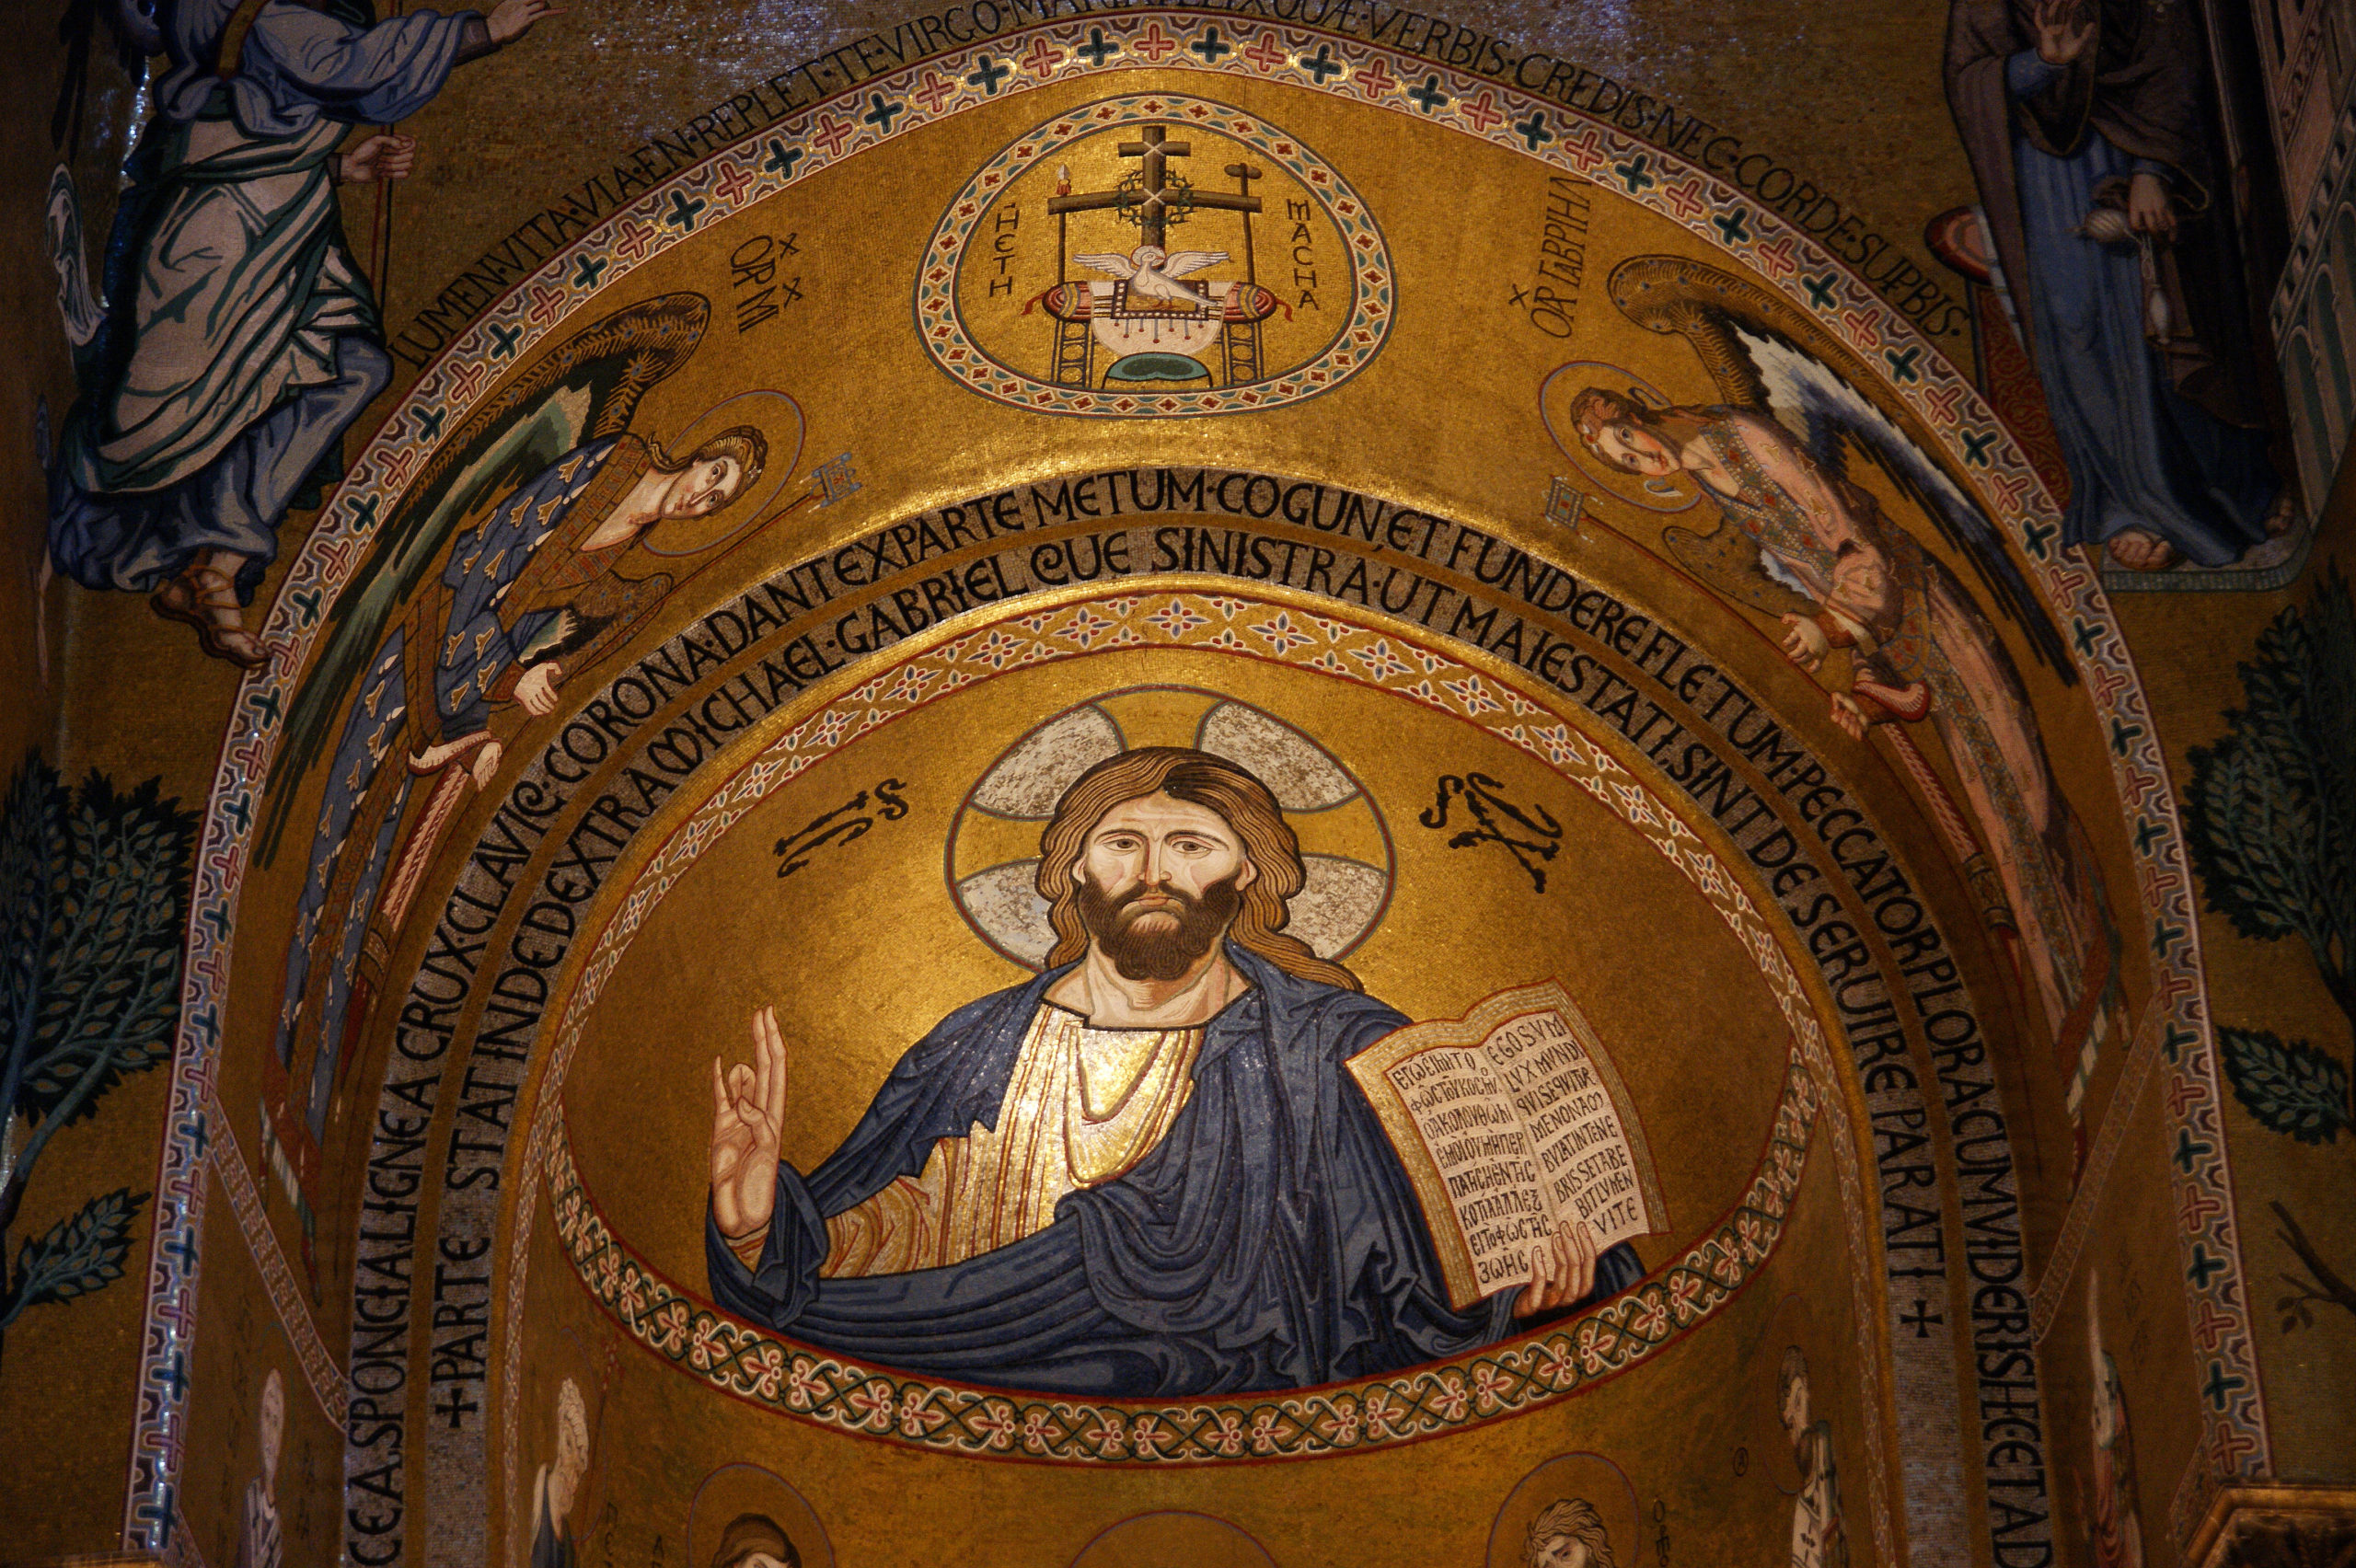 Christ Pantokrator (in apse) and Hetoimasia (above), Cappella Palatina, c. 1130-43, Palermo (photo: Allie_Caulfield, CC BY 2.0)